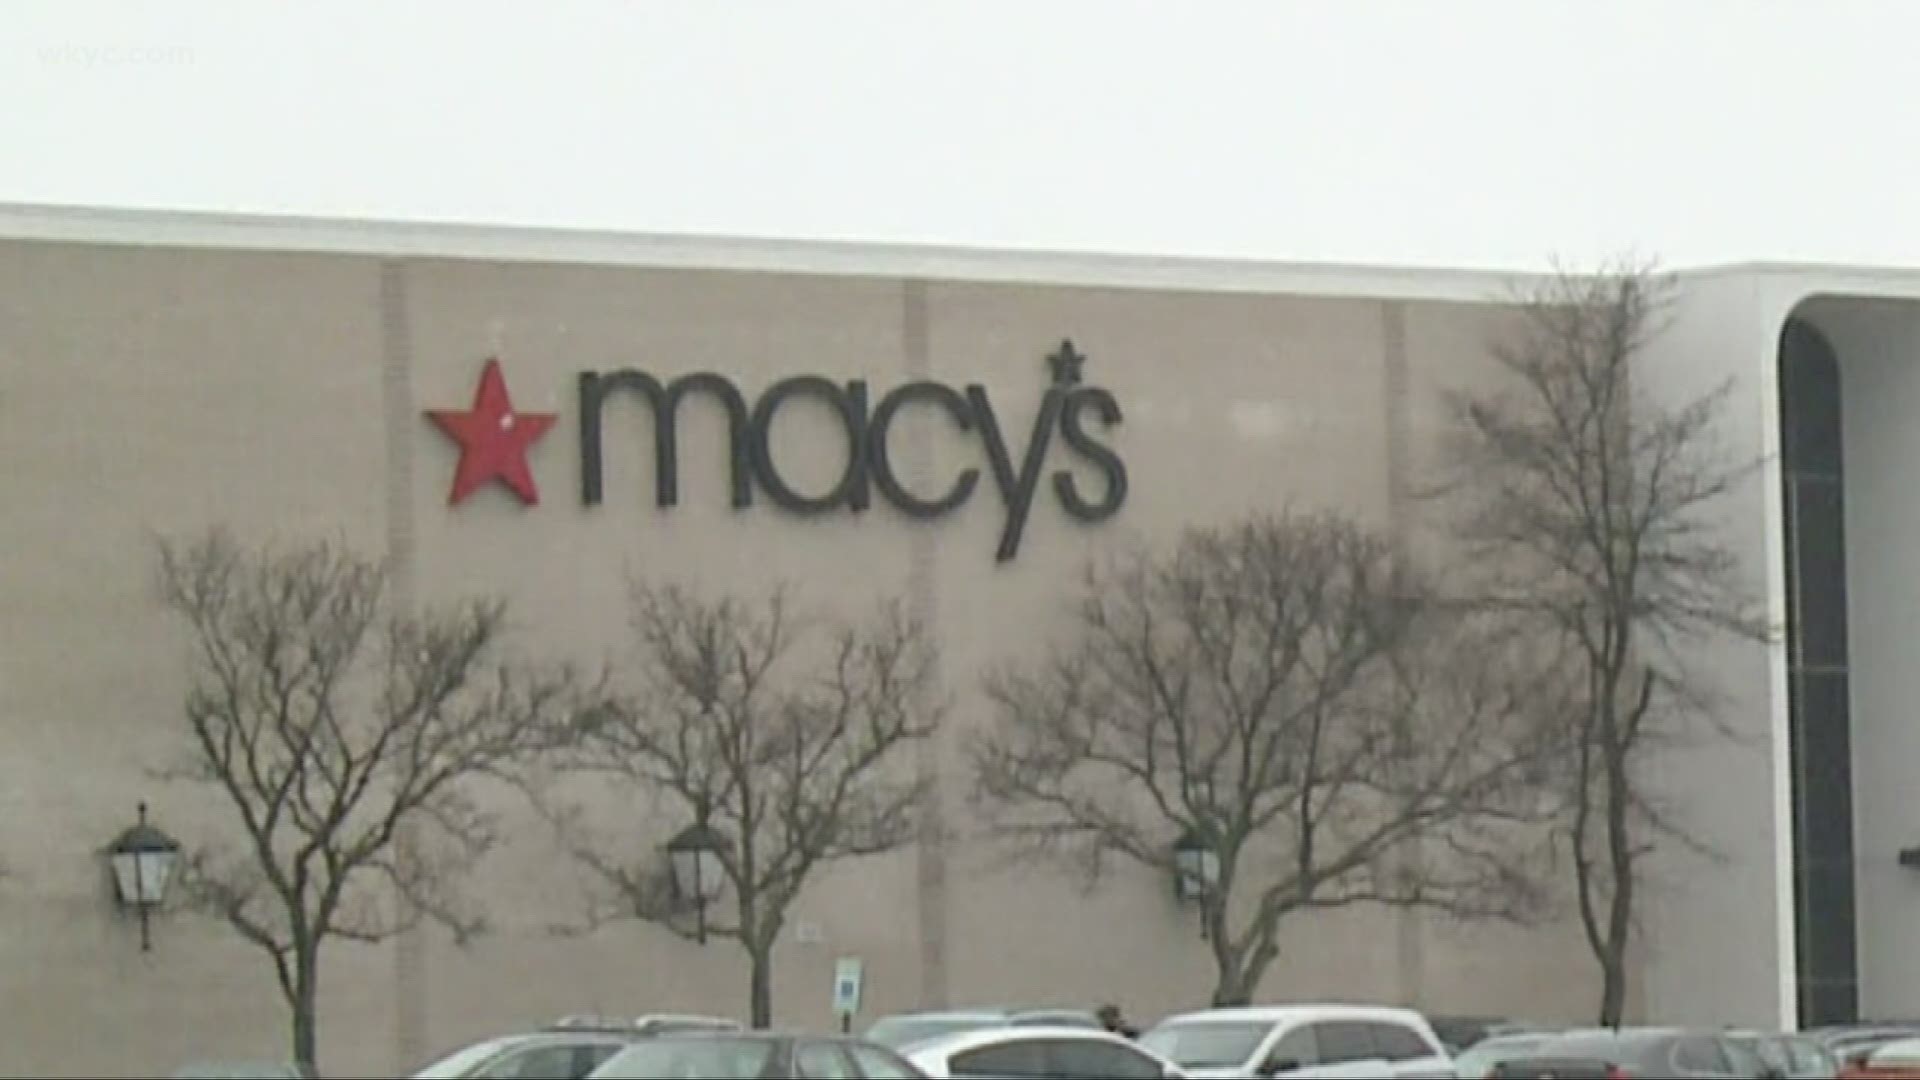 After a run of 55 years at the Stow-Kent Plaza, Macy's is closing the store. A spokesperson says a clearance sale will begin this month and last 8 to 12 weeks.